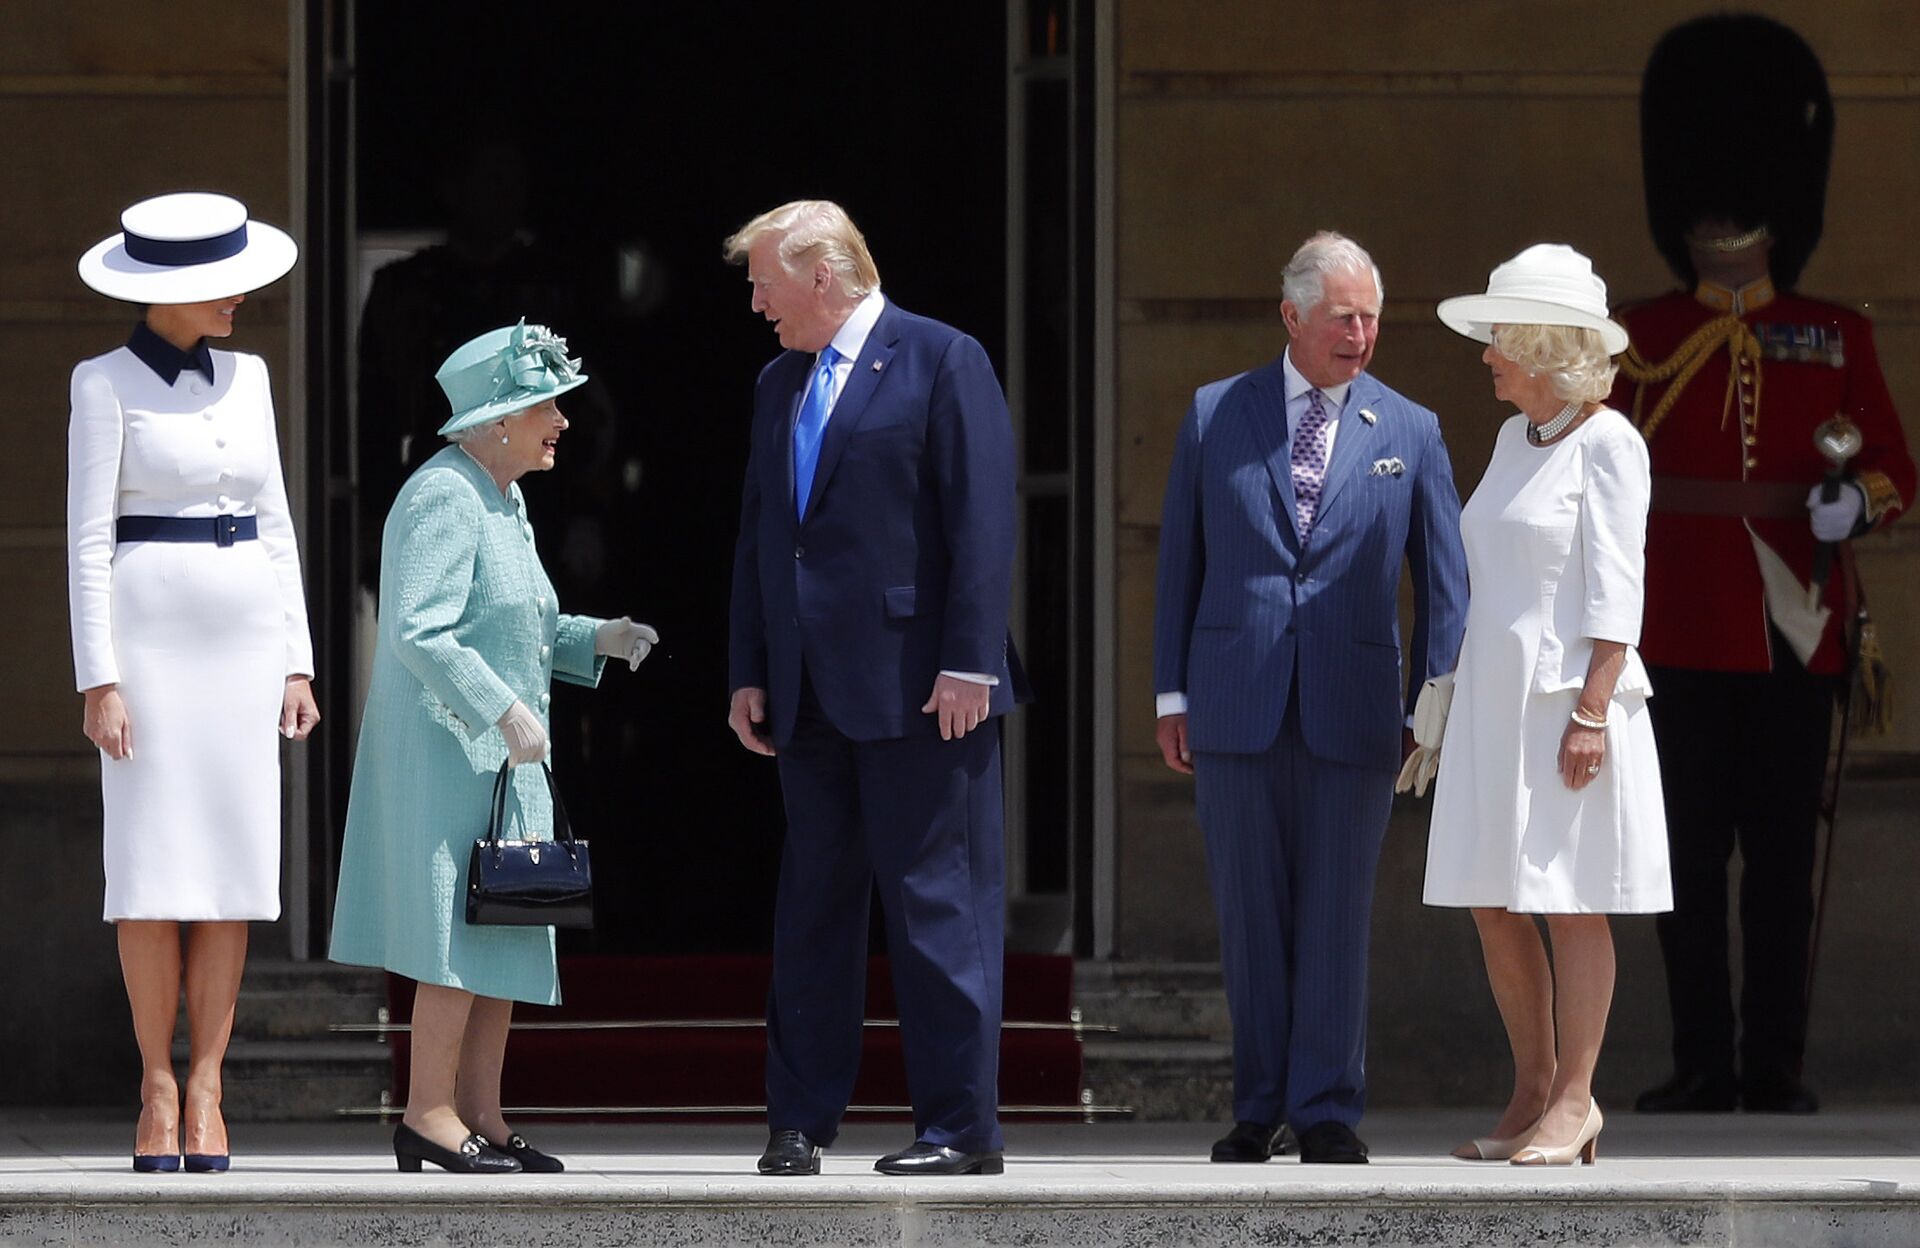 Britain's Queen Elizabeth II greets President Donald Trump, center, and first lady Melania Trump, left, with Britain's Prince Charles and Camilla, Duchess of Cornwall during a ceremonial welcome in the garden of Buckingham Palace in London, Monday, June 3, 2019 on the opening day of a three day state visit to Britain - Sputnik International, 1920, 06.10.2021